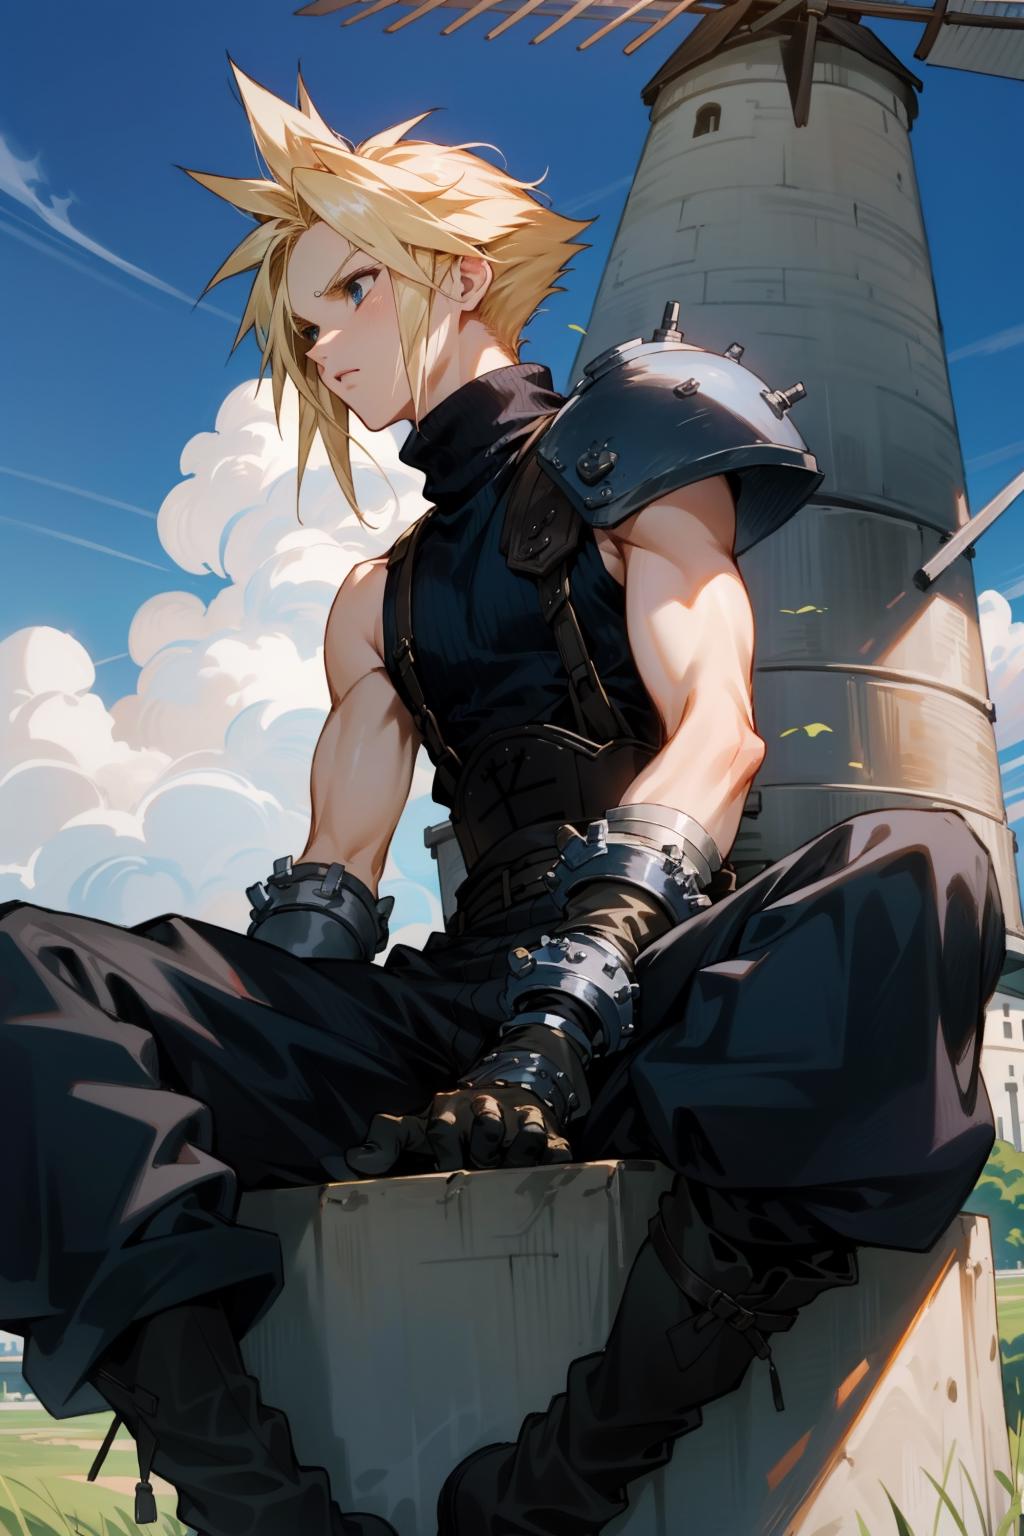 A cartoon illustration of a man with blond hair sitting on a block.